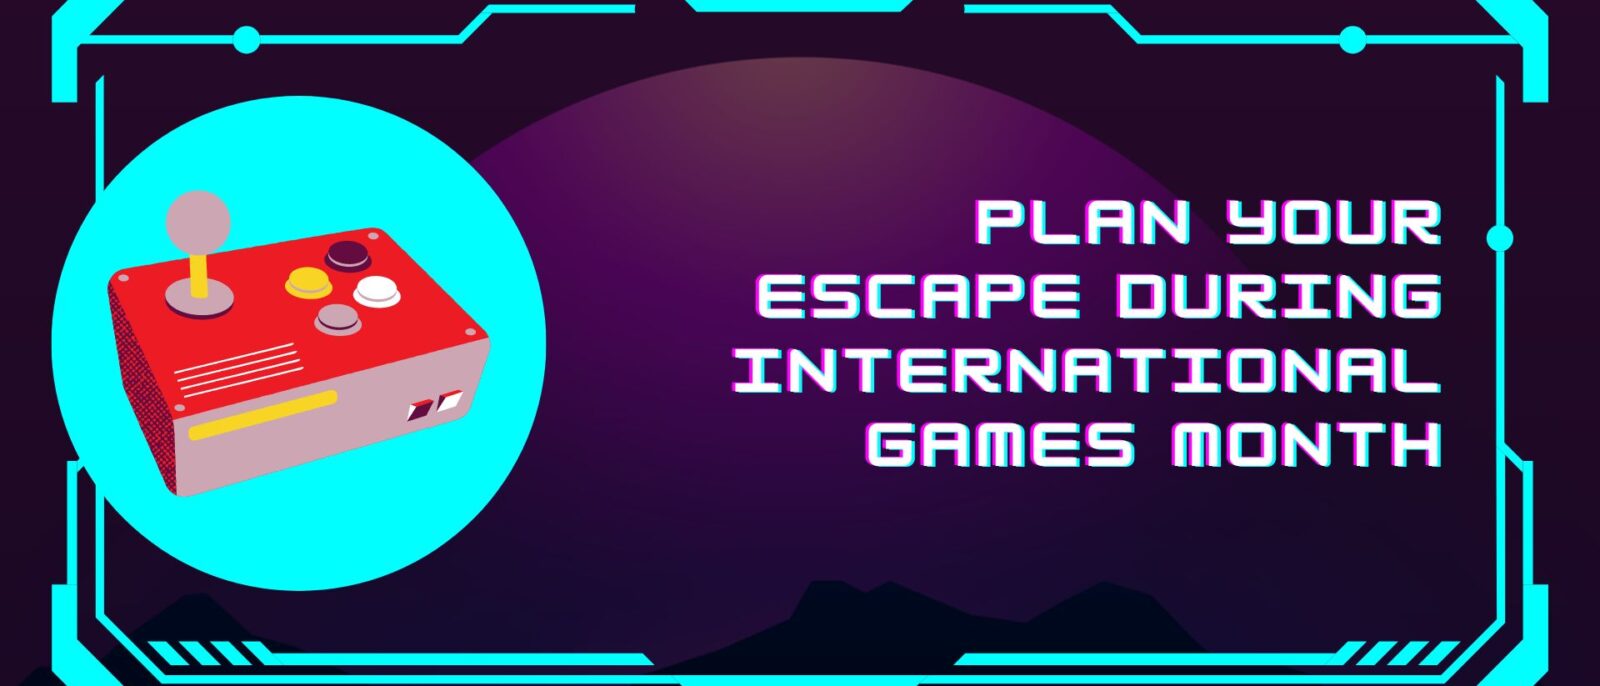 Plan your escape during International Games Month